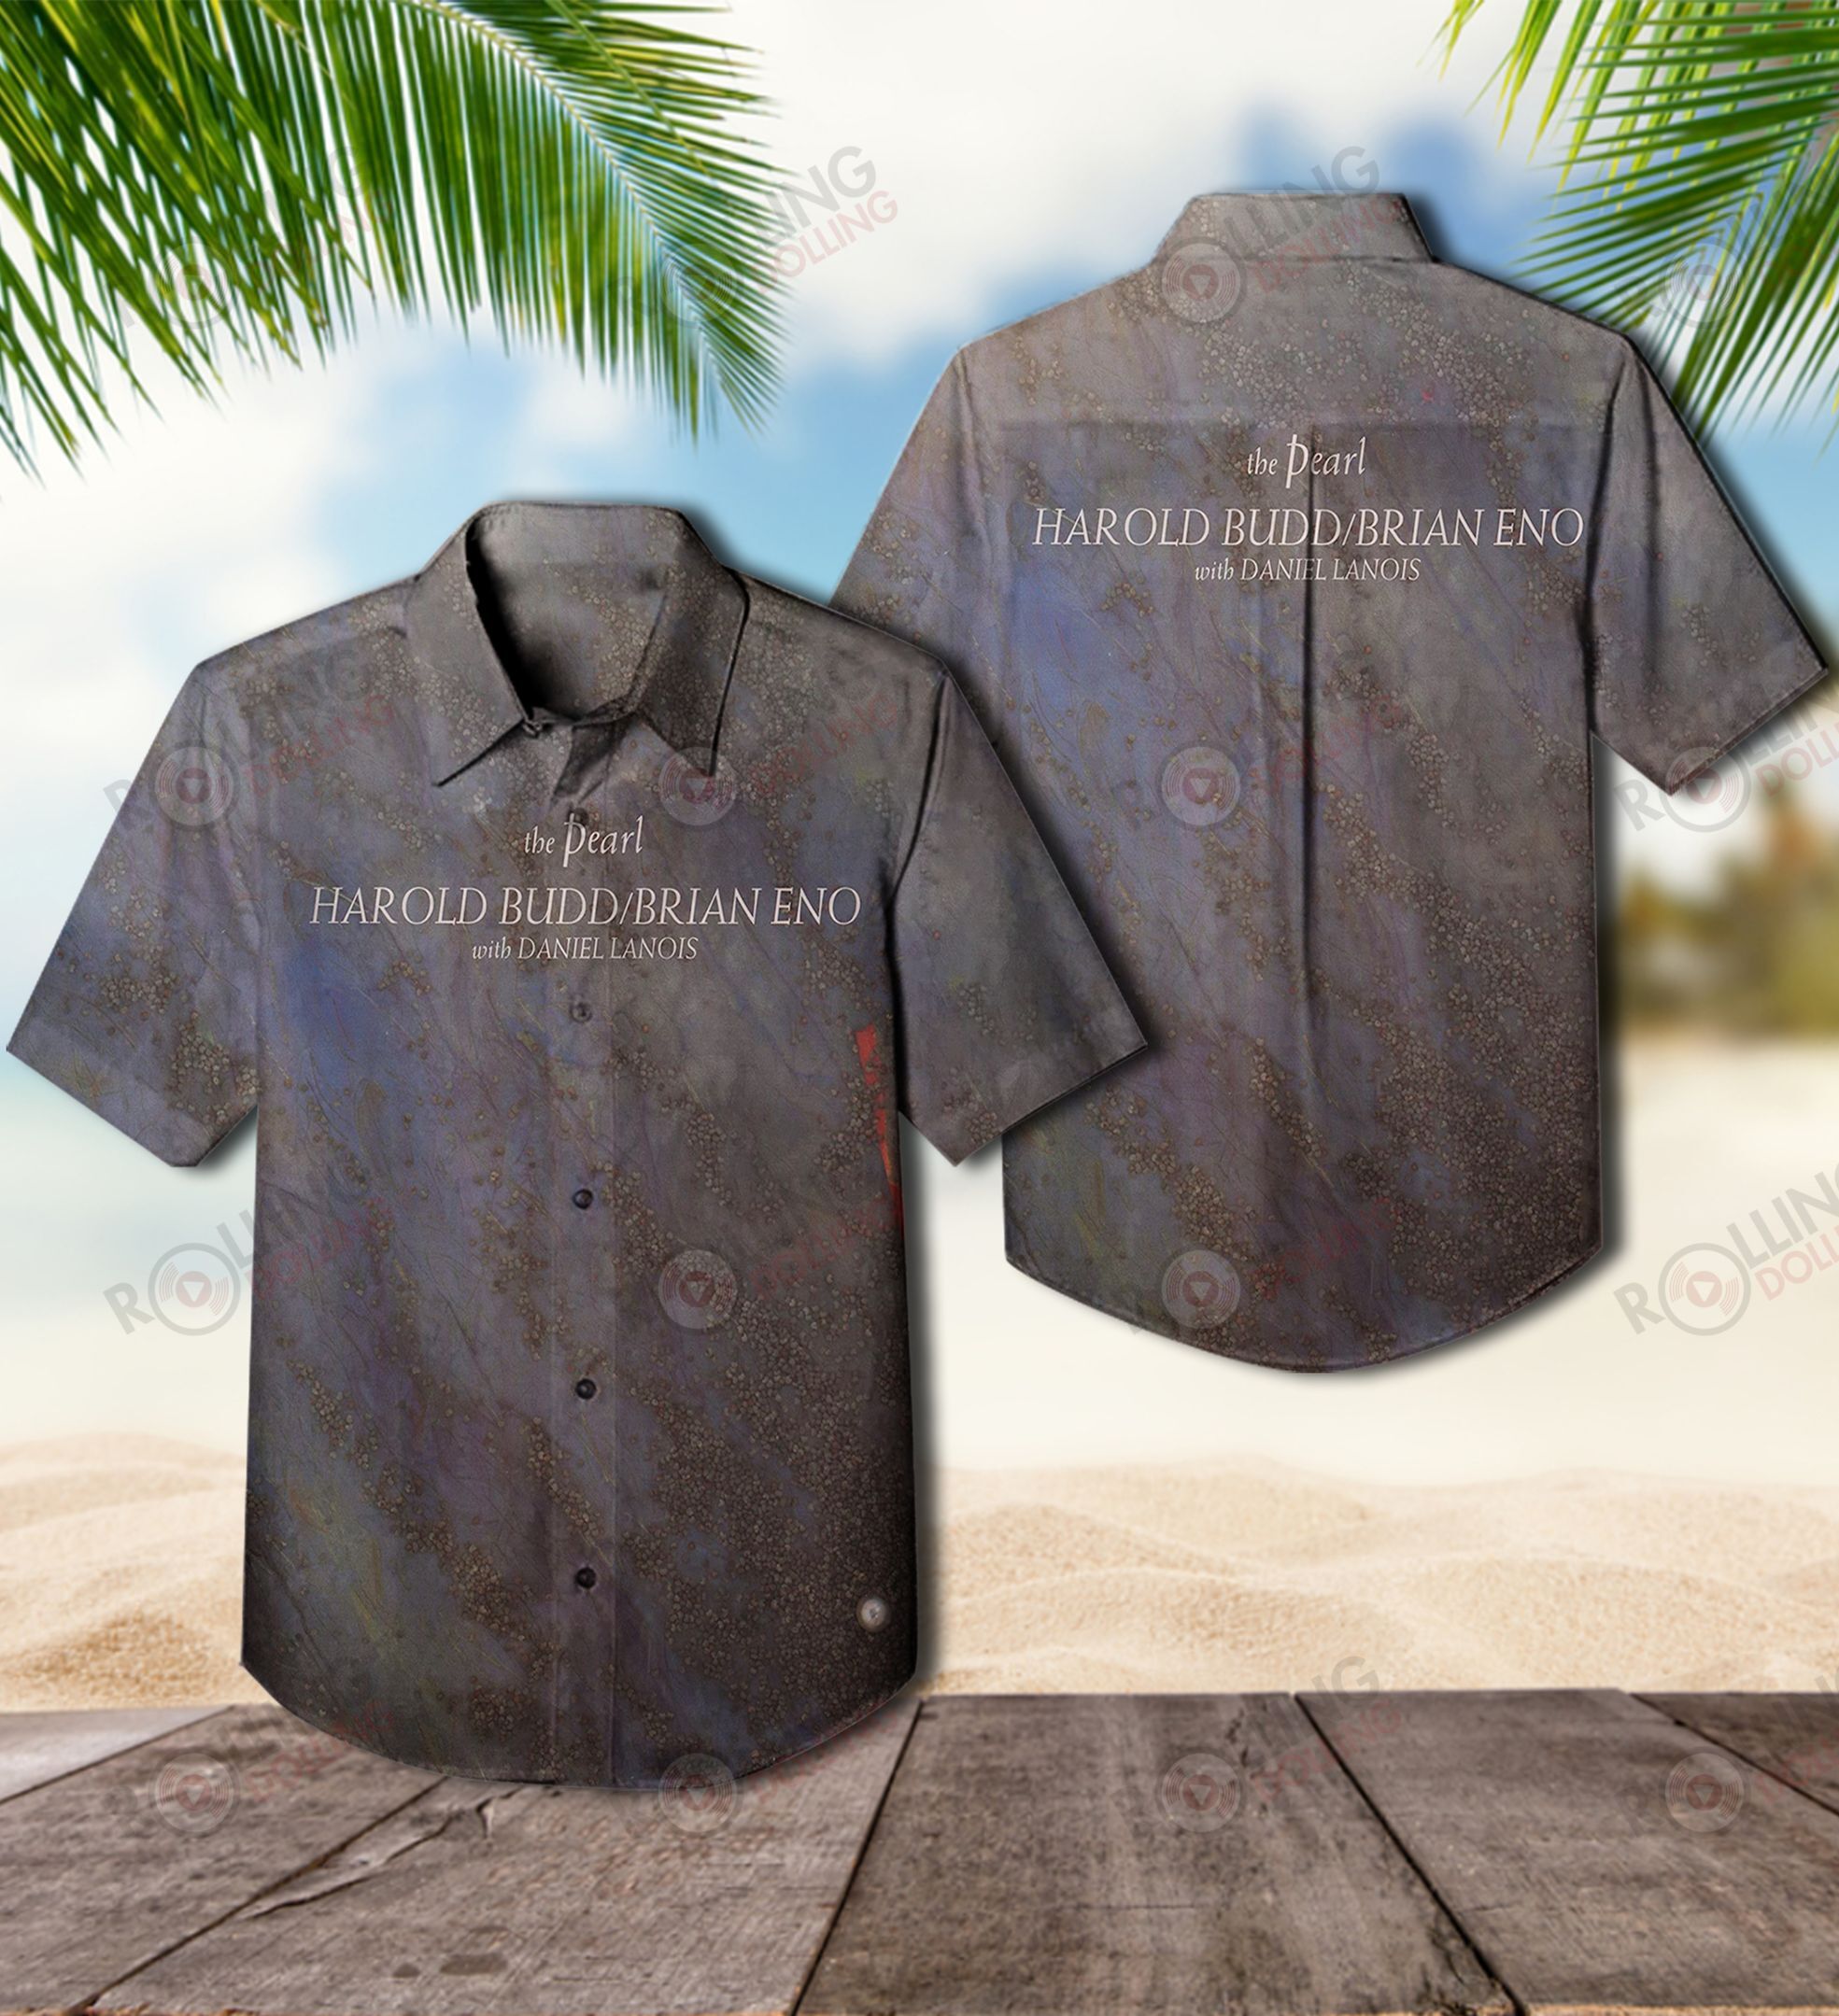 For summer, consider wearing This Amazing Hawaiian Shirt shirt in our store 156